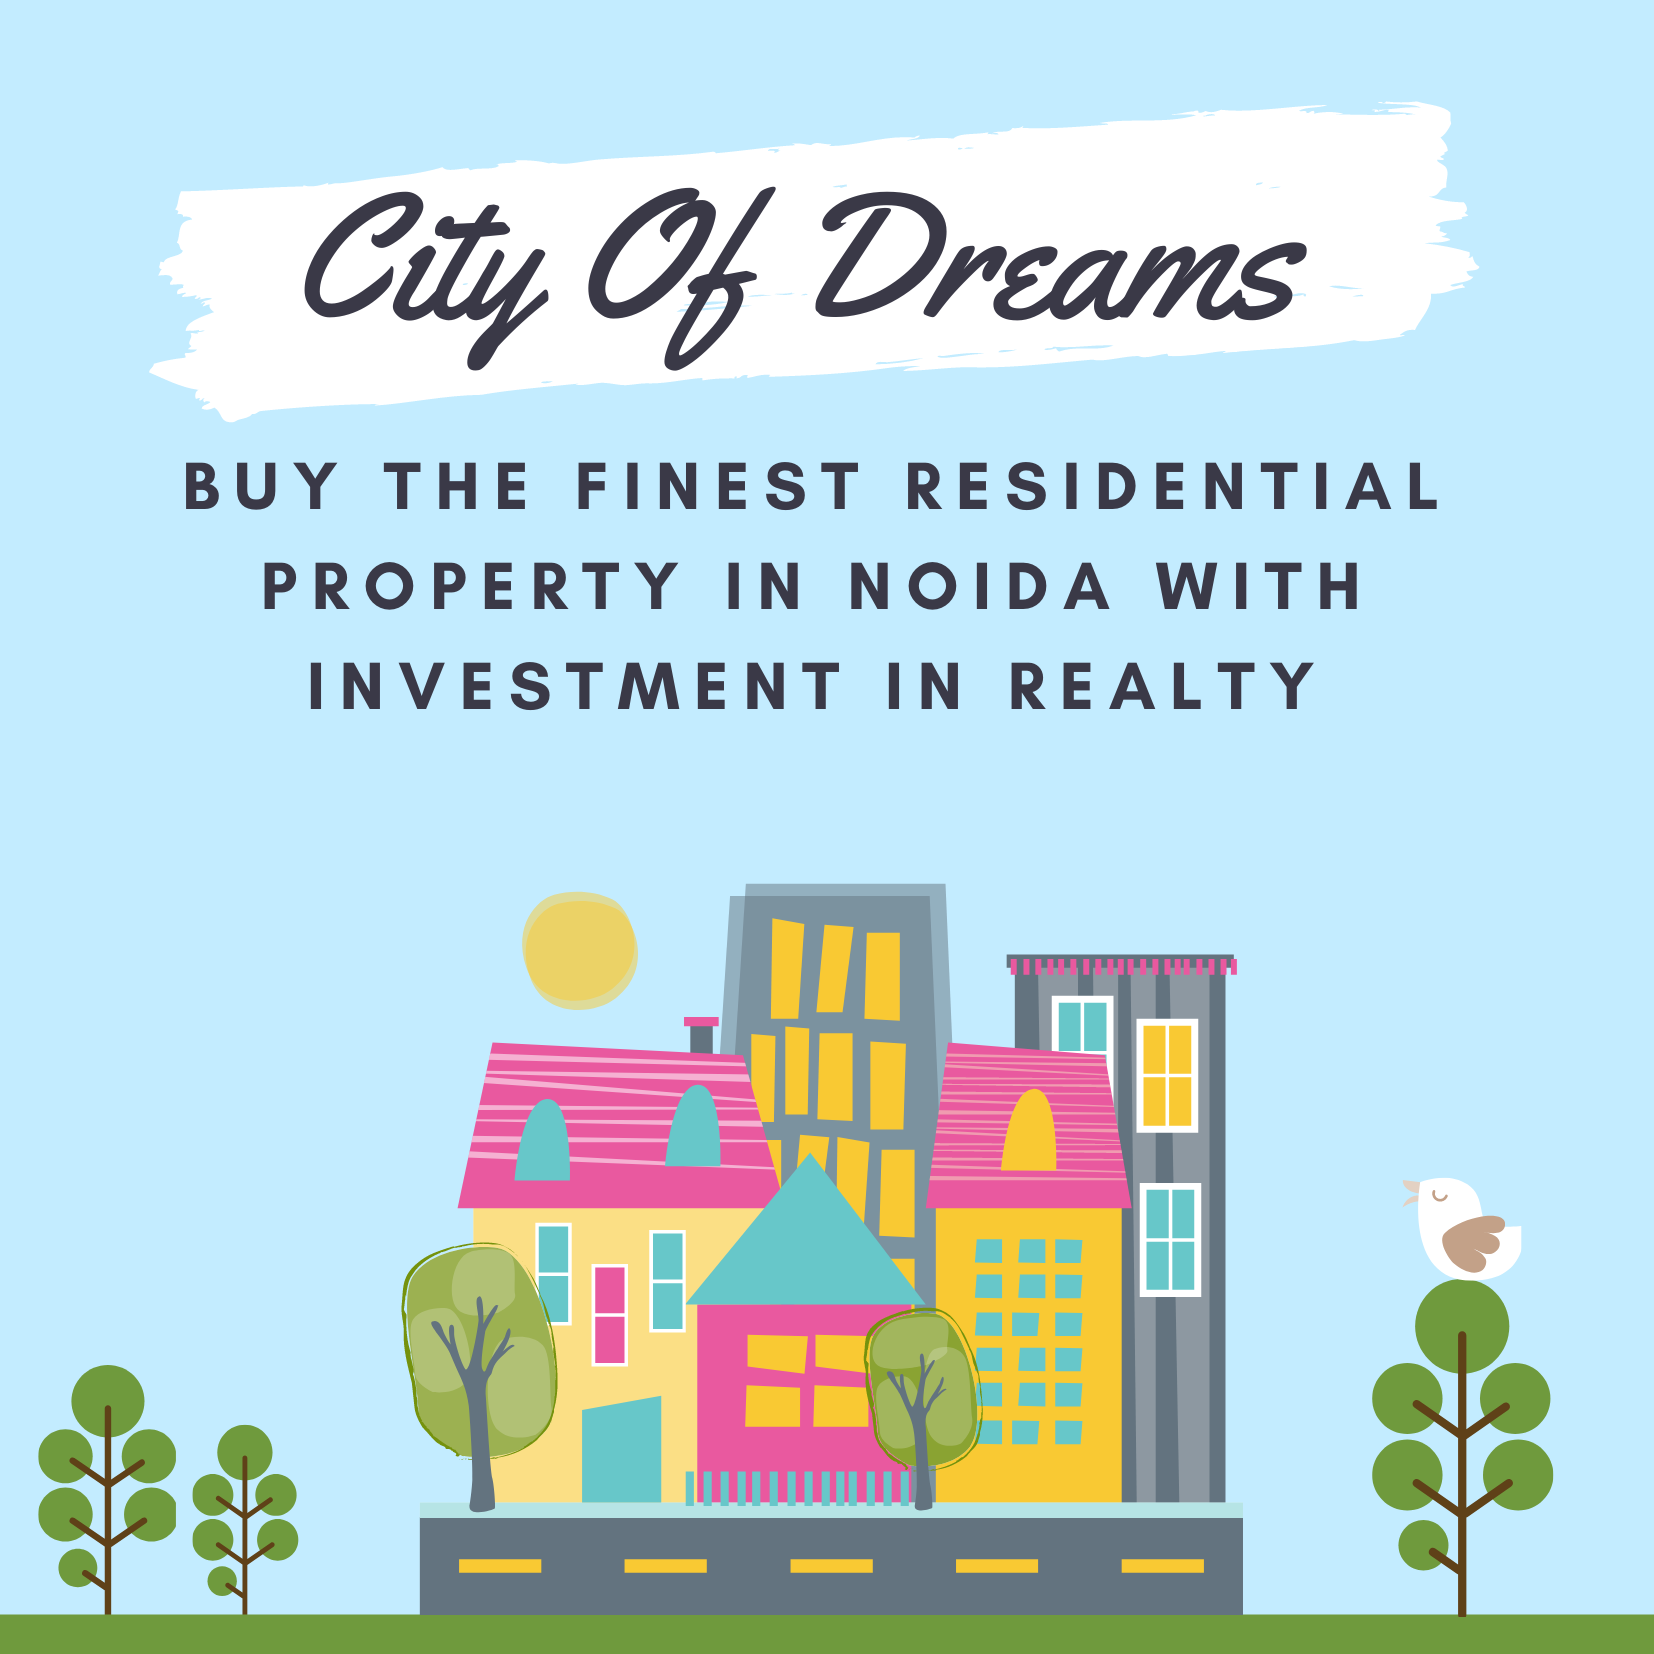 Buy the finest residential property in Noida with investment in realty